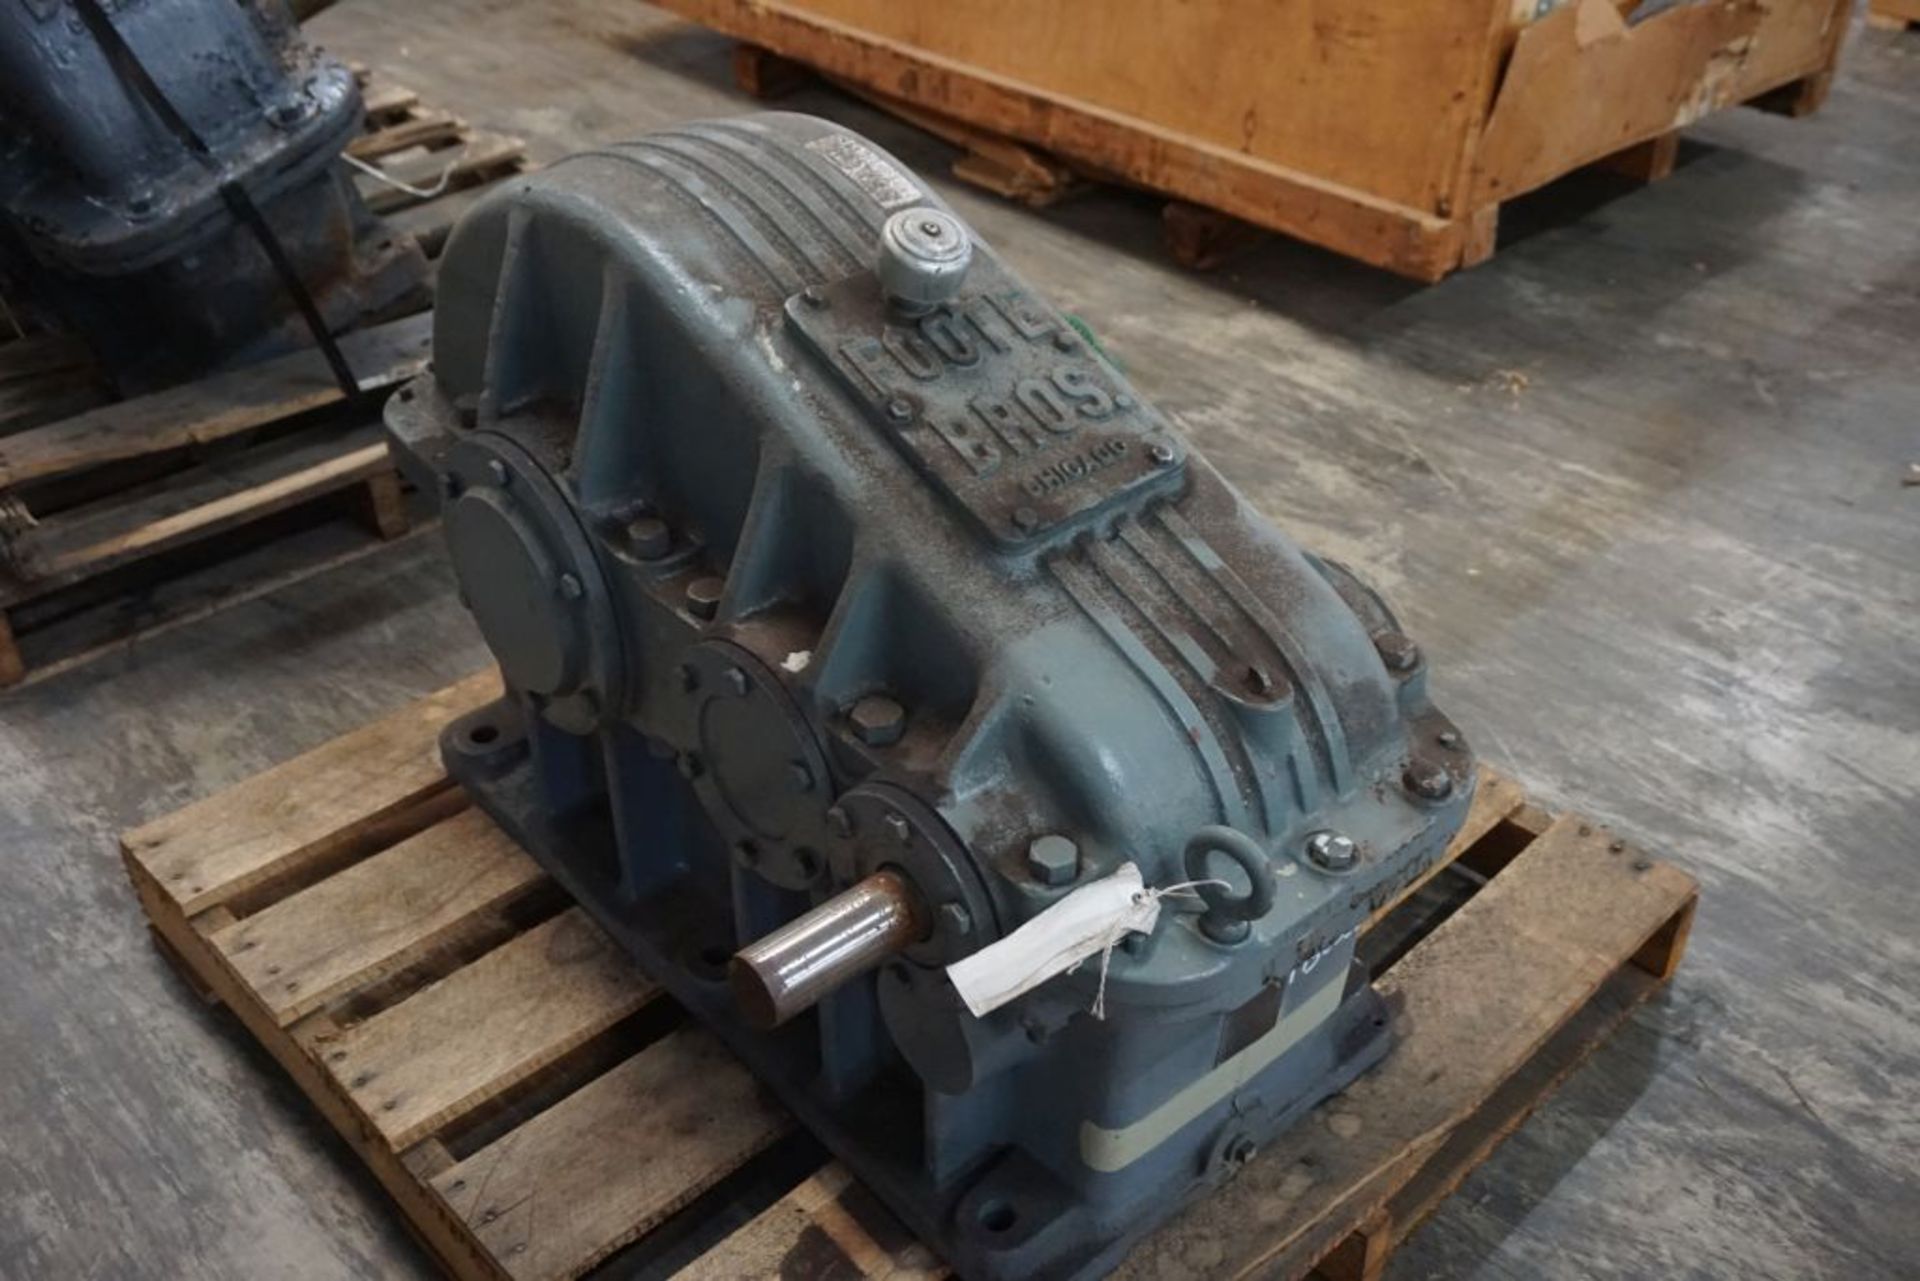 Foote Brothers Gearbox|Input: 1750 RPM; Output: 183.01; Ratio: 9.562|Lot Loading Fee: $5.00